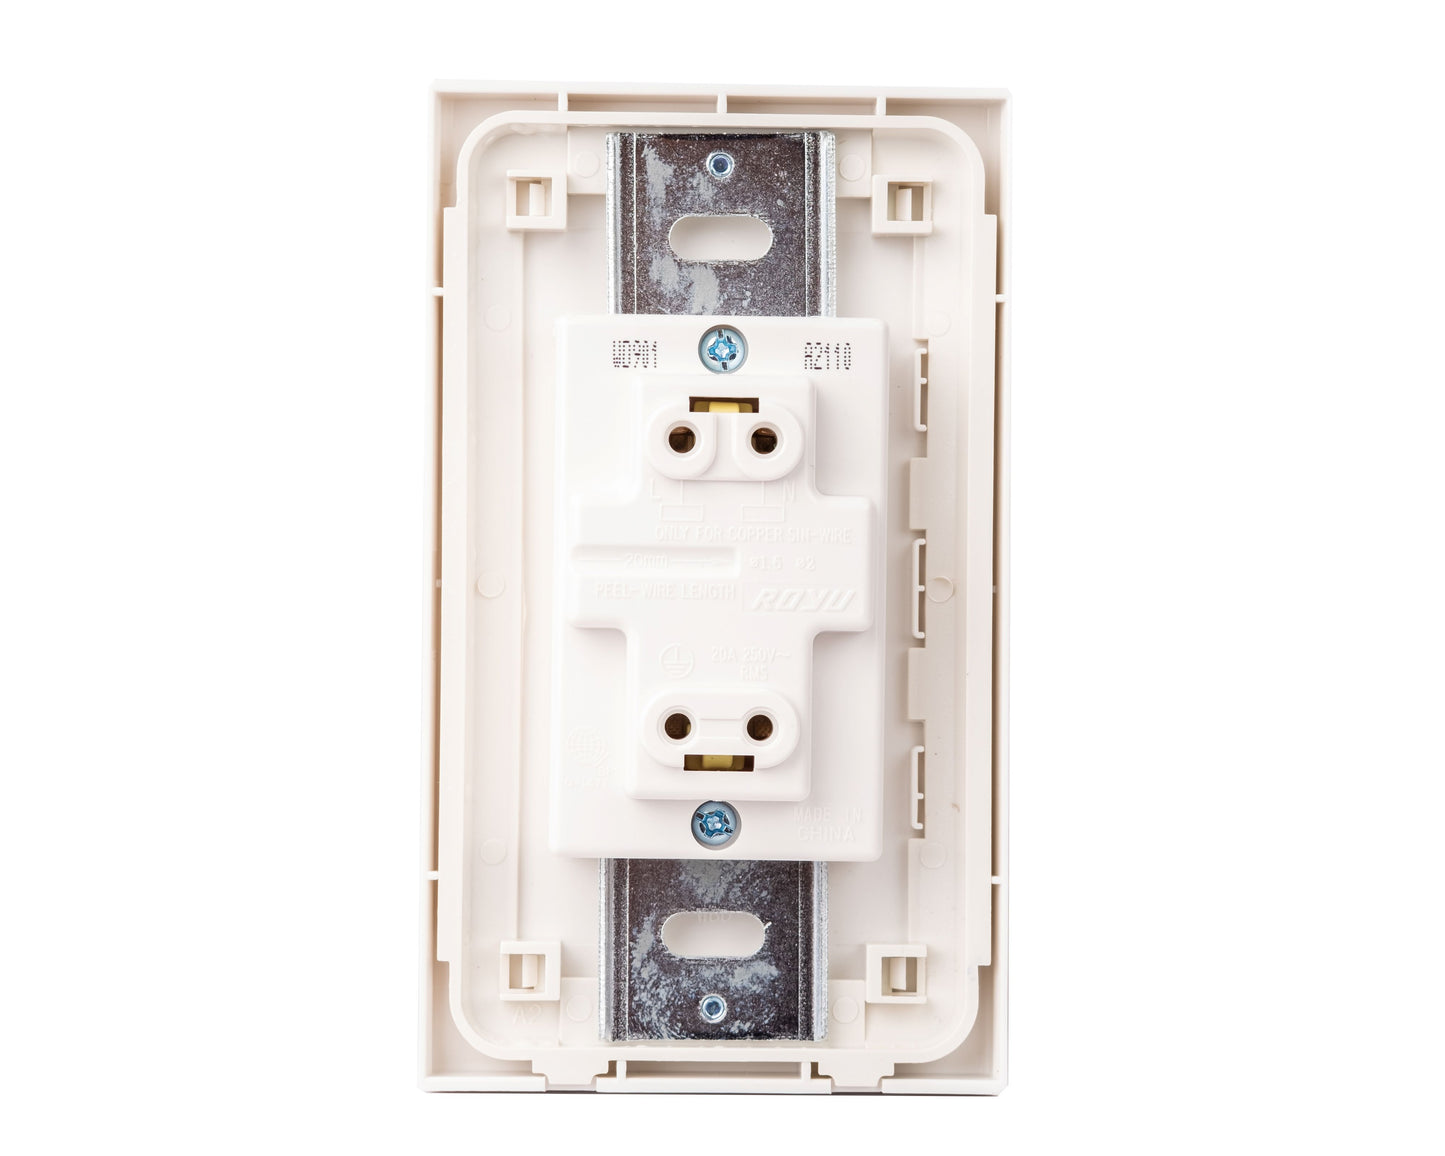 ROYU WIDE SERIES AIRCON OUTLET SET